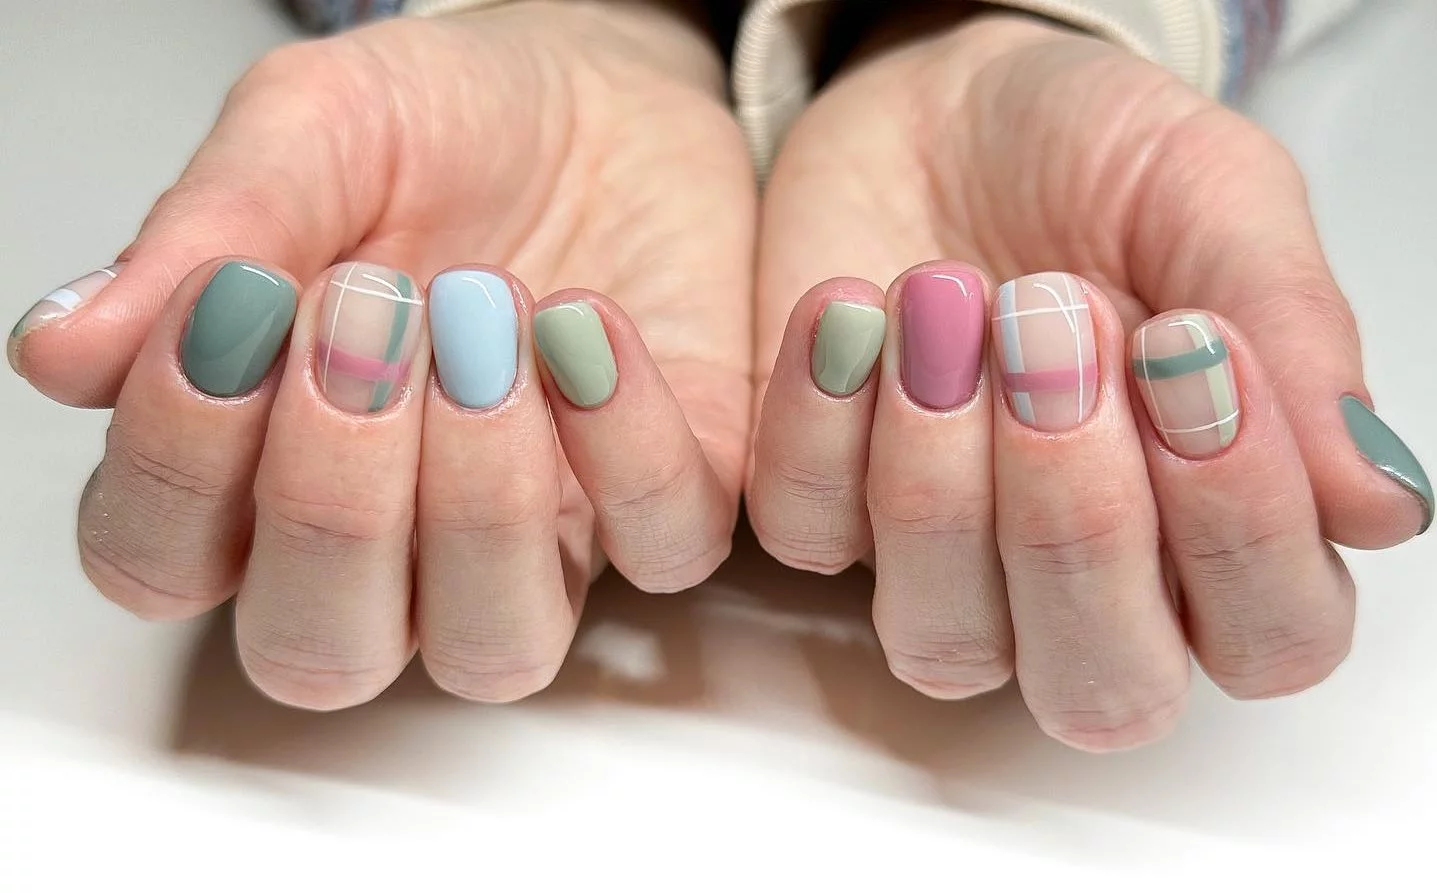 23 January Nails Design Trends - Awesome To Try Now